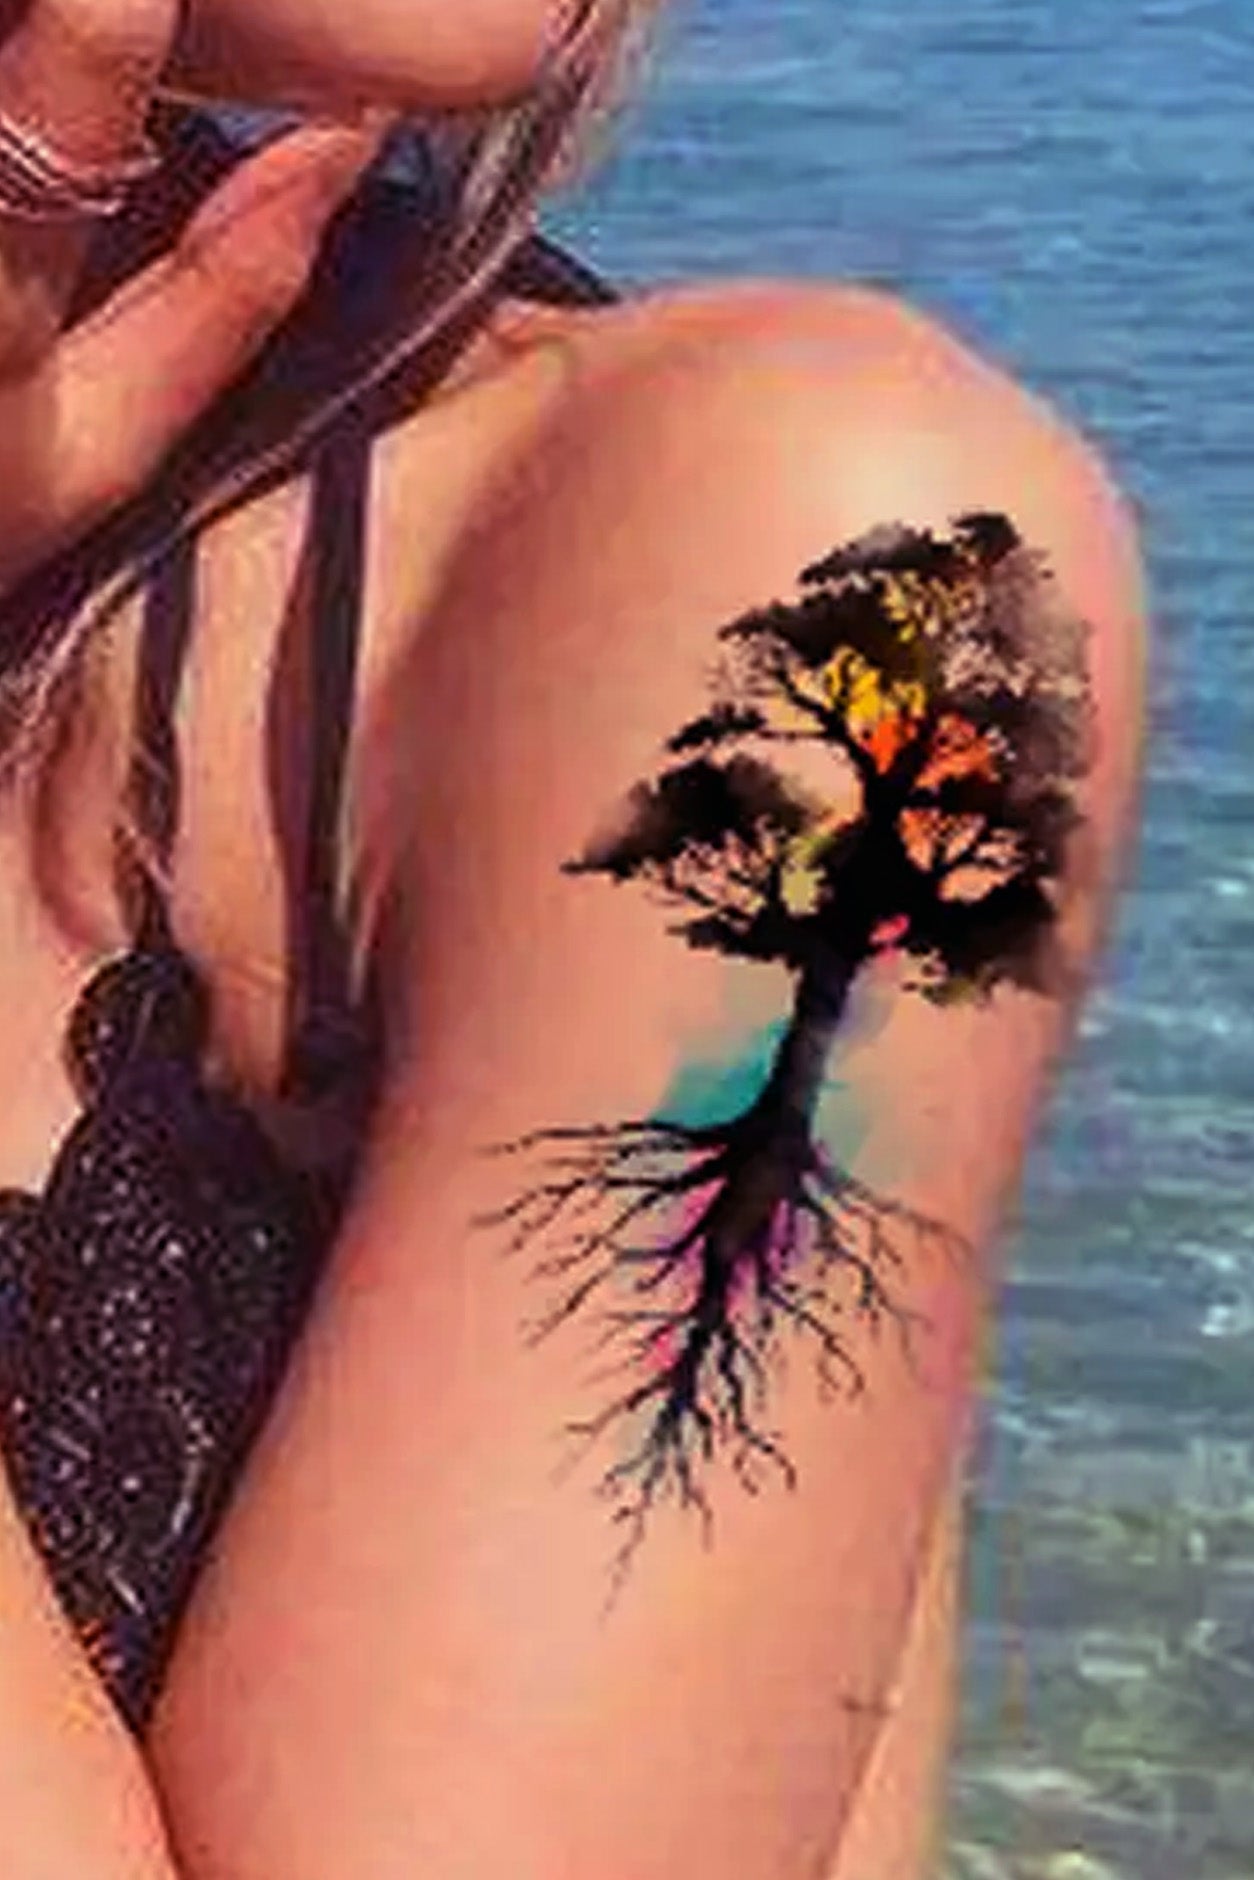 Image is the tree of life on a womans arm.